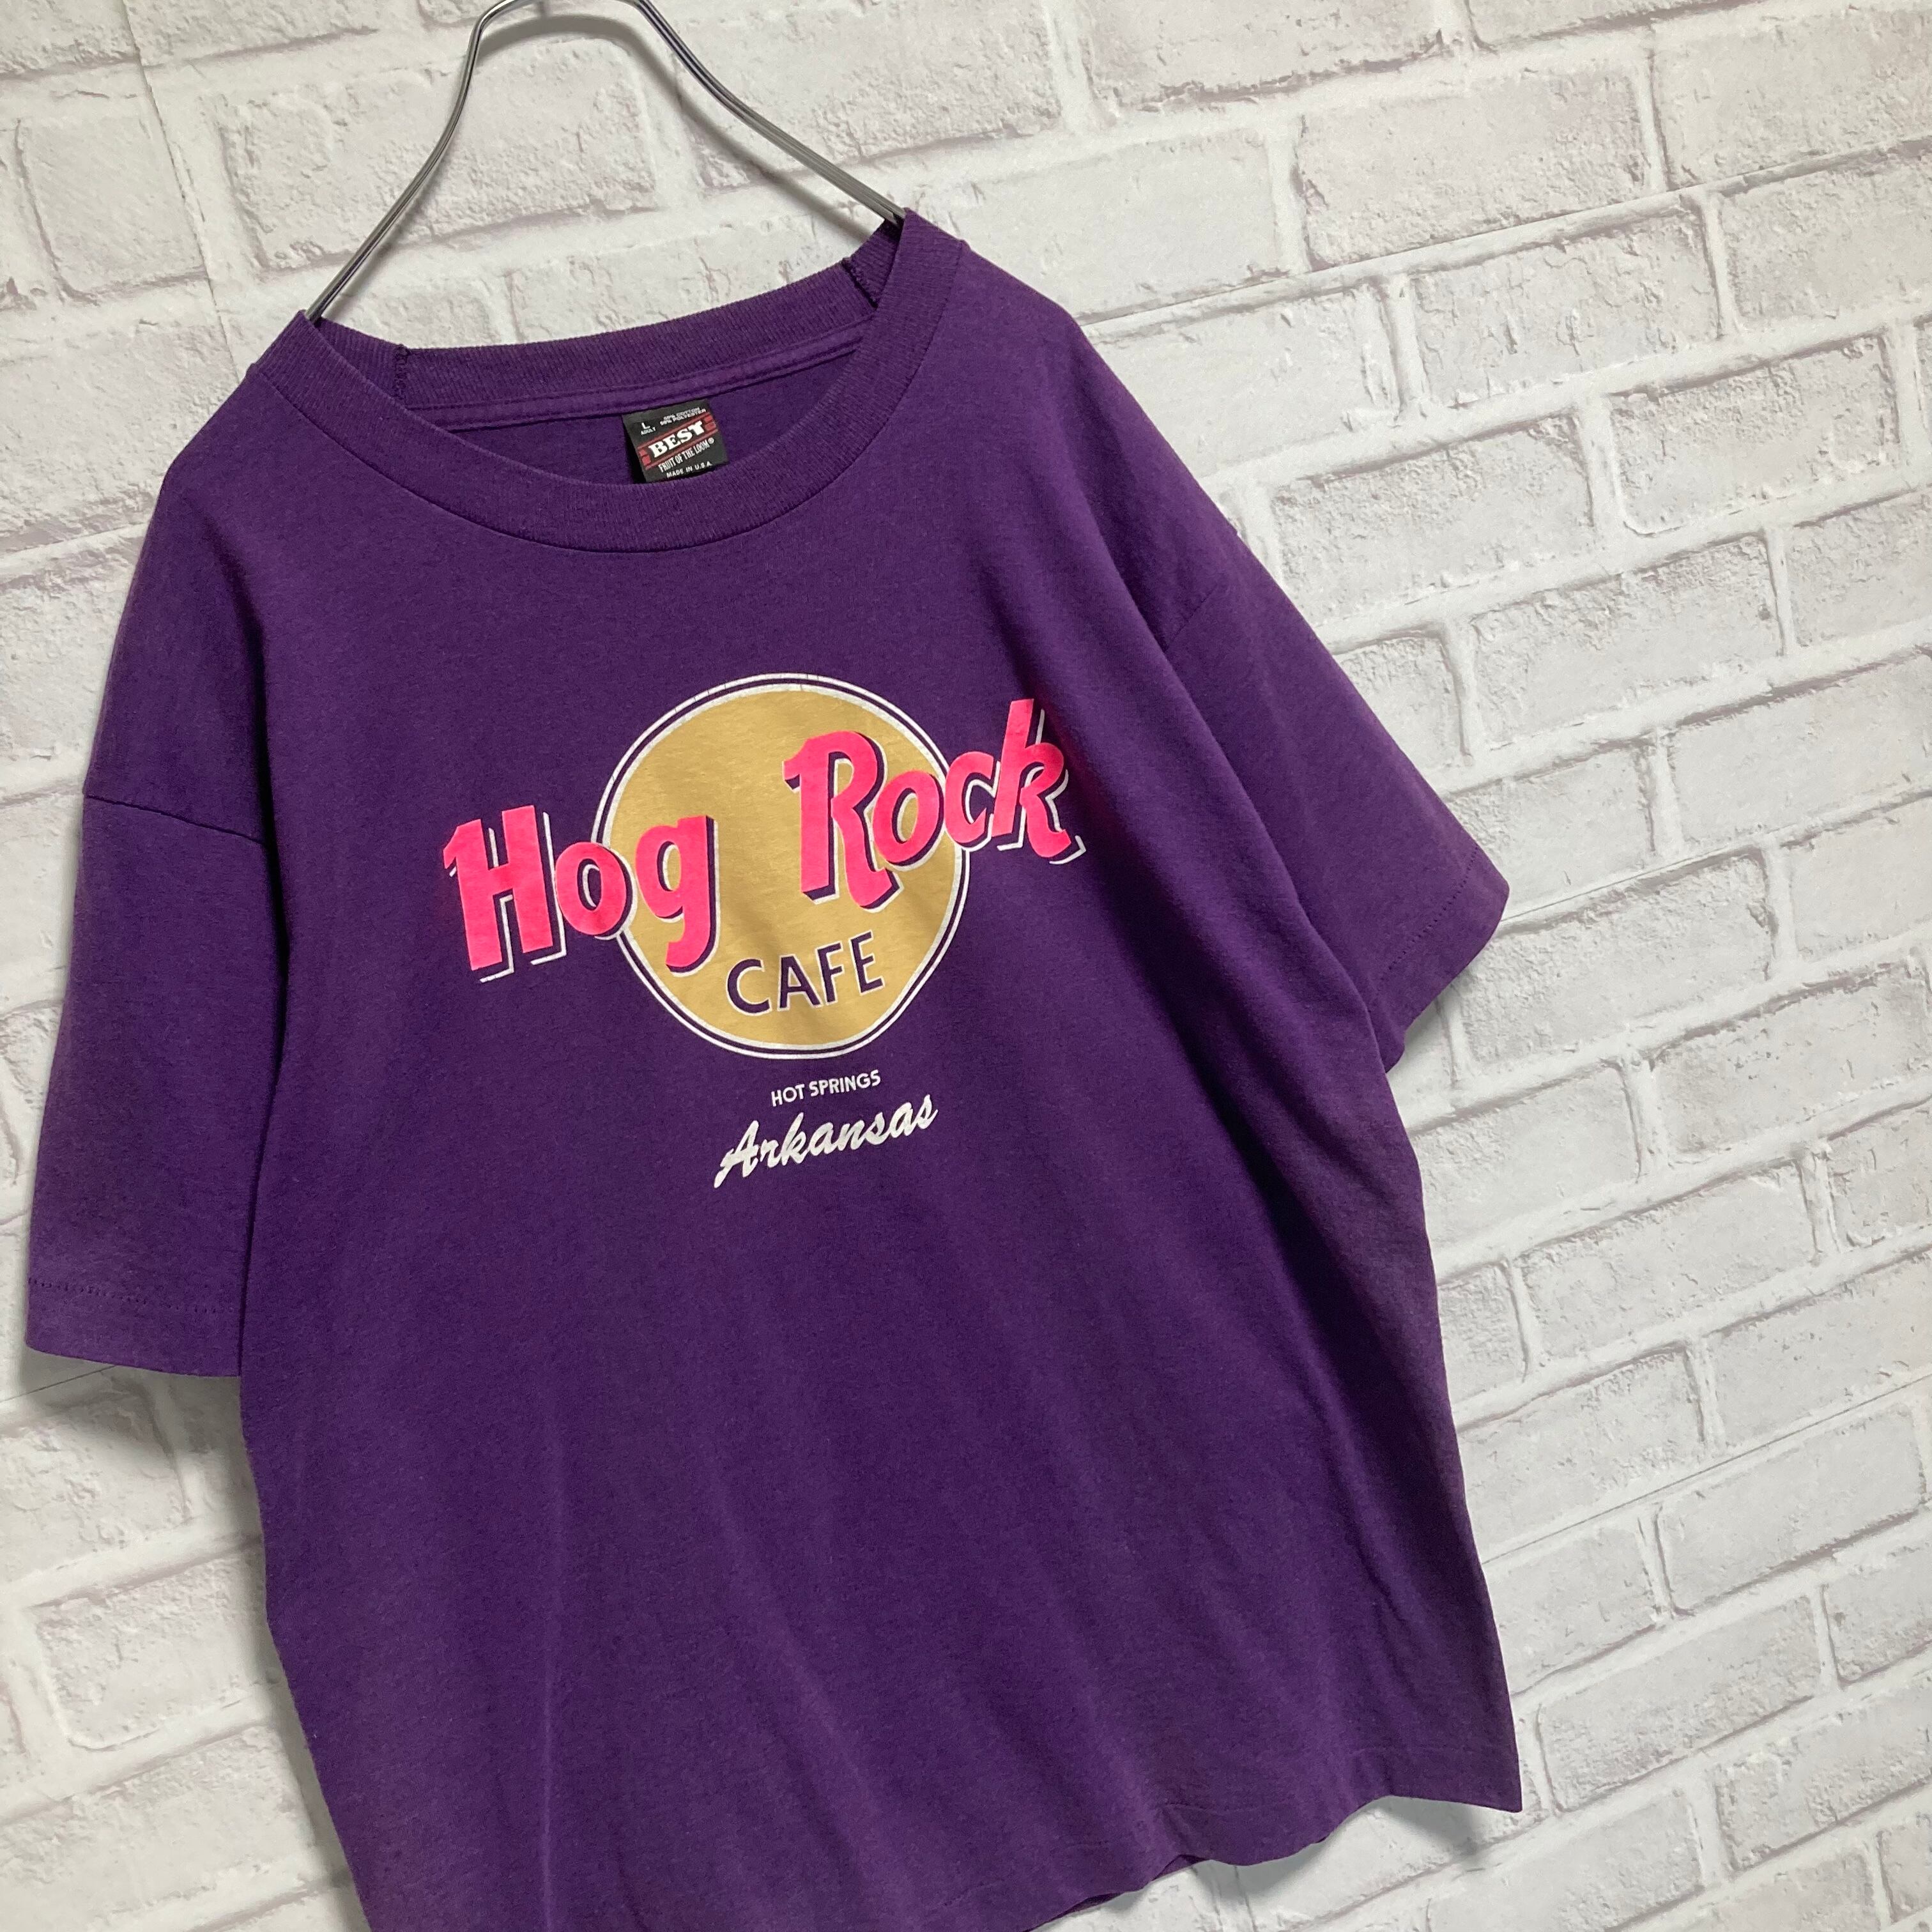 FRUIT OF THE LOOM】S/S Tee L Made in USA “ Hog Rock CAFE” 90s